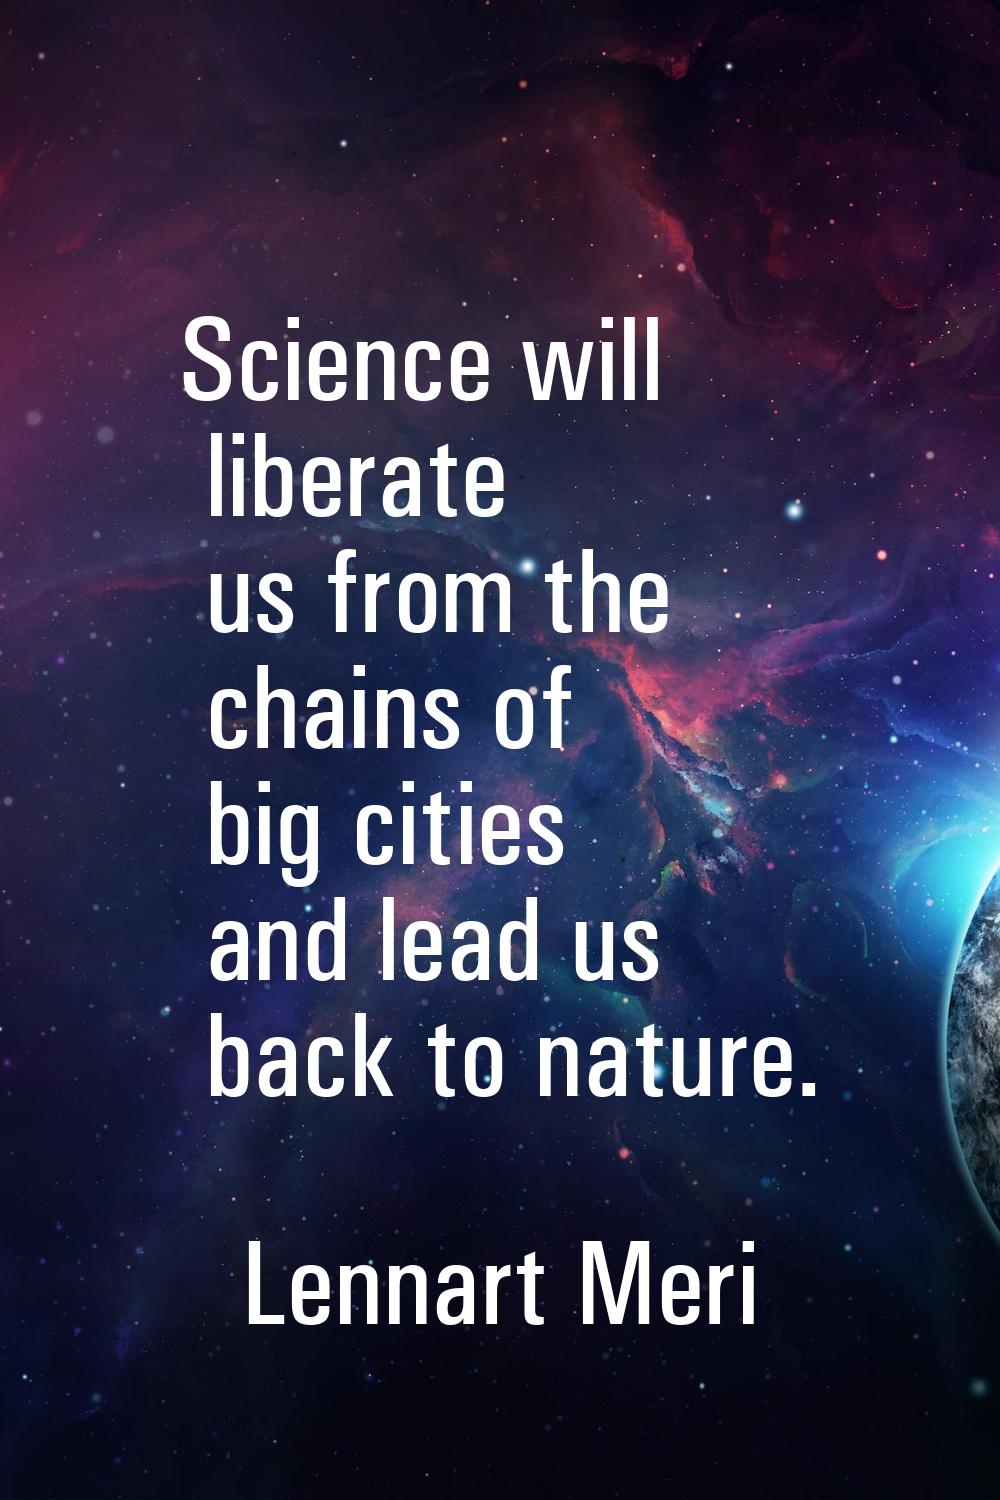 Science will liberate us from the chains of big cities and lead us back to nature.